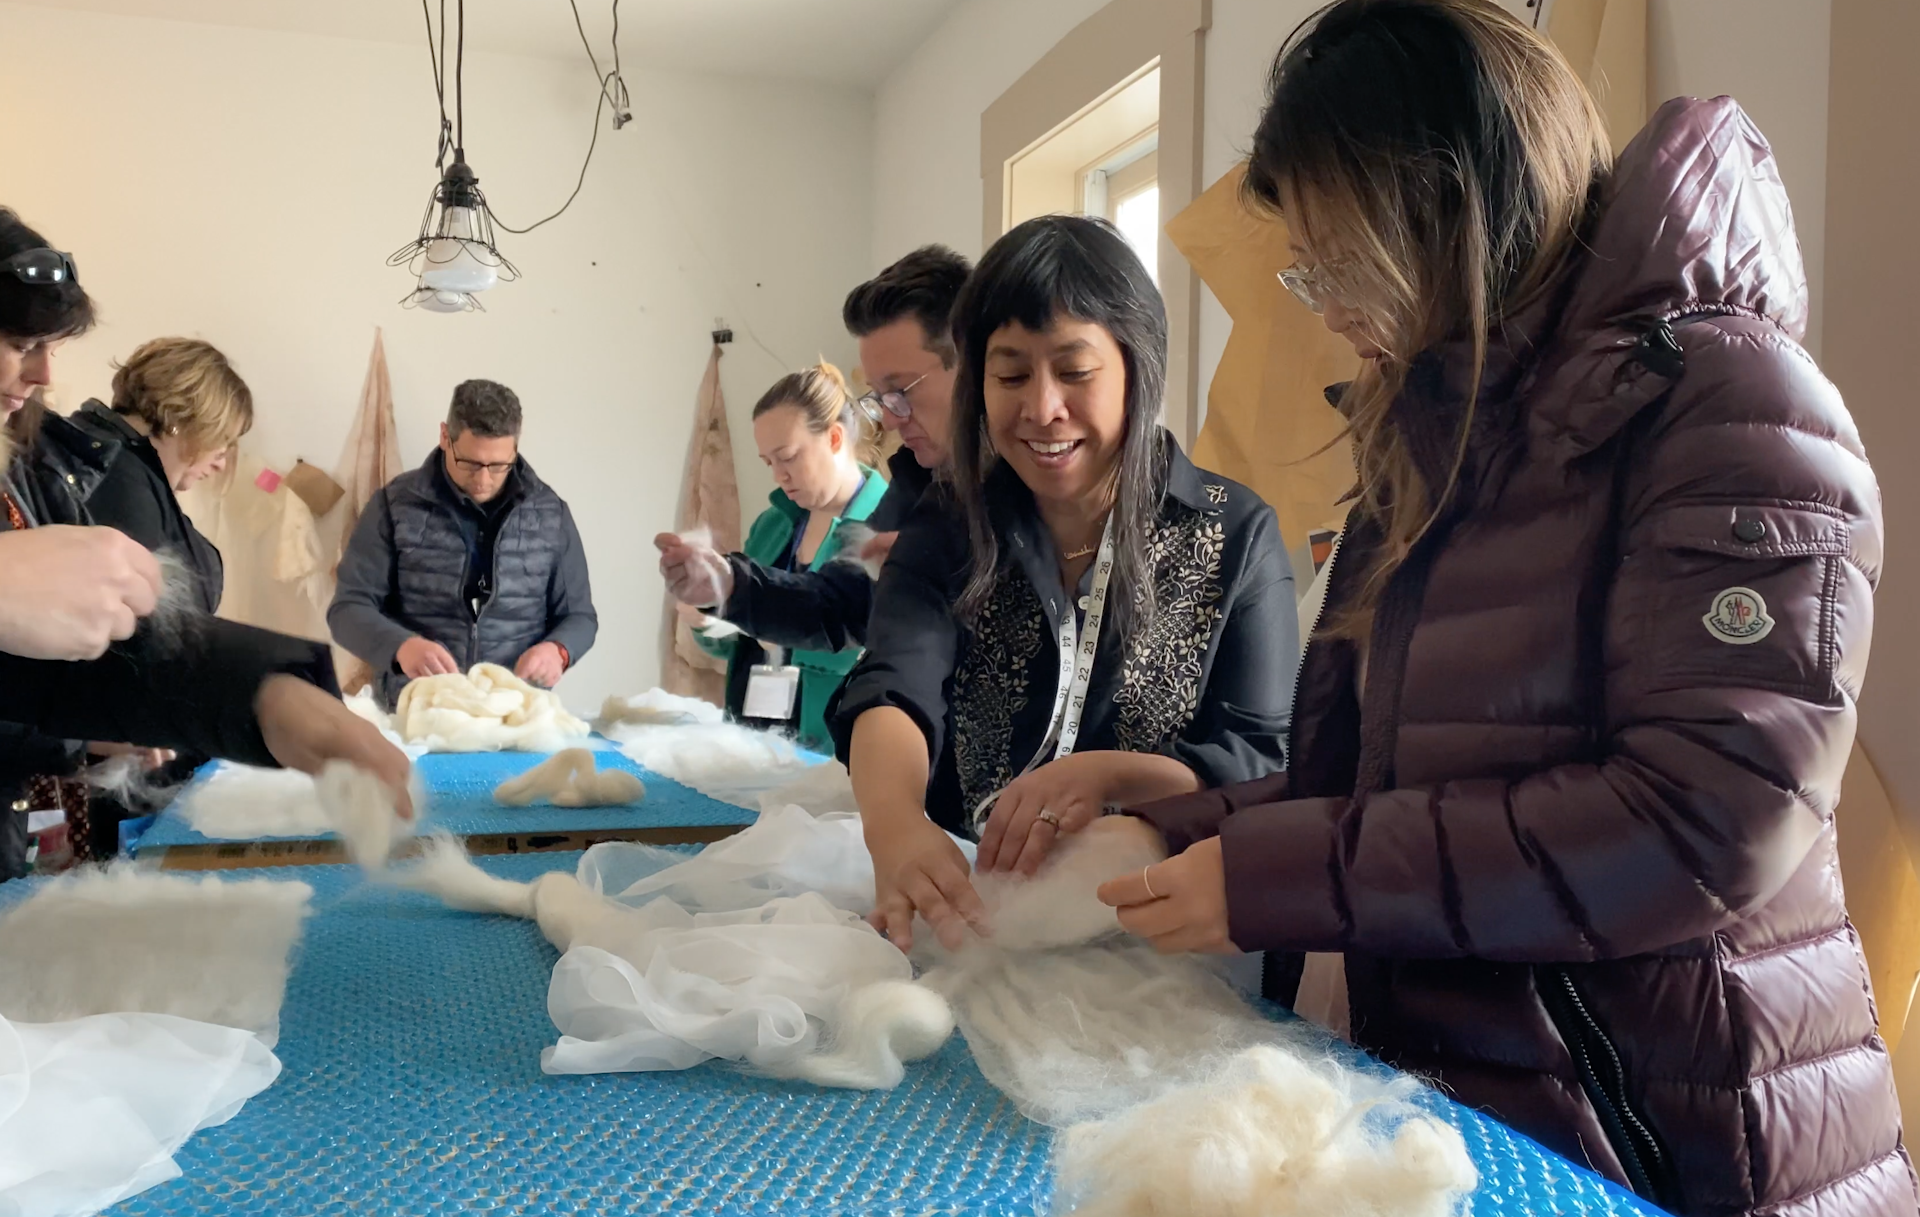 Celeste Malvar-Stewart shows one of her workshop students how to manipulate the wool to create a scarf at her Columbus, Ohio studio called Hangar 391. Seven people stand around a table covered in blue bubble wrap and white wool in an airy, light-filled room.